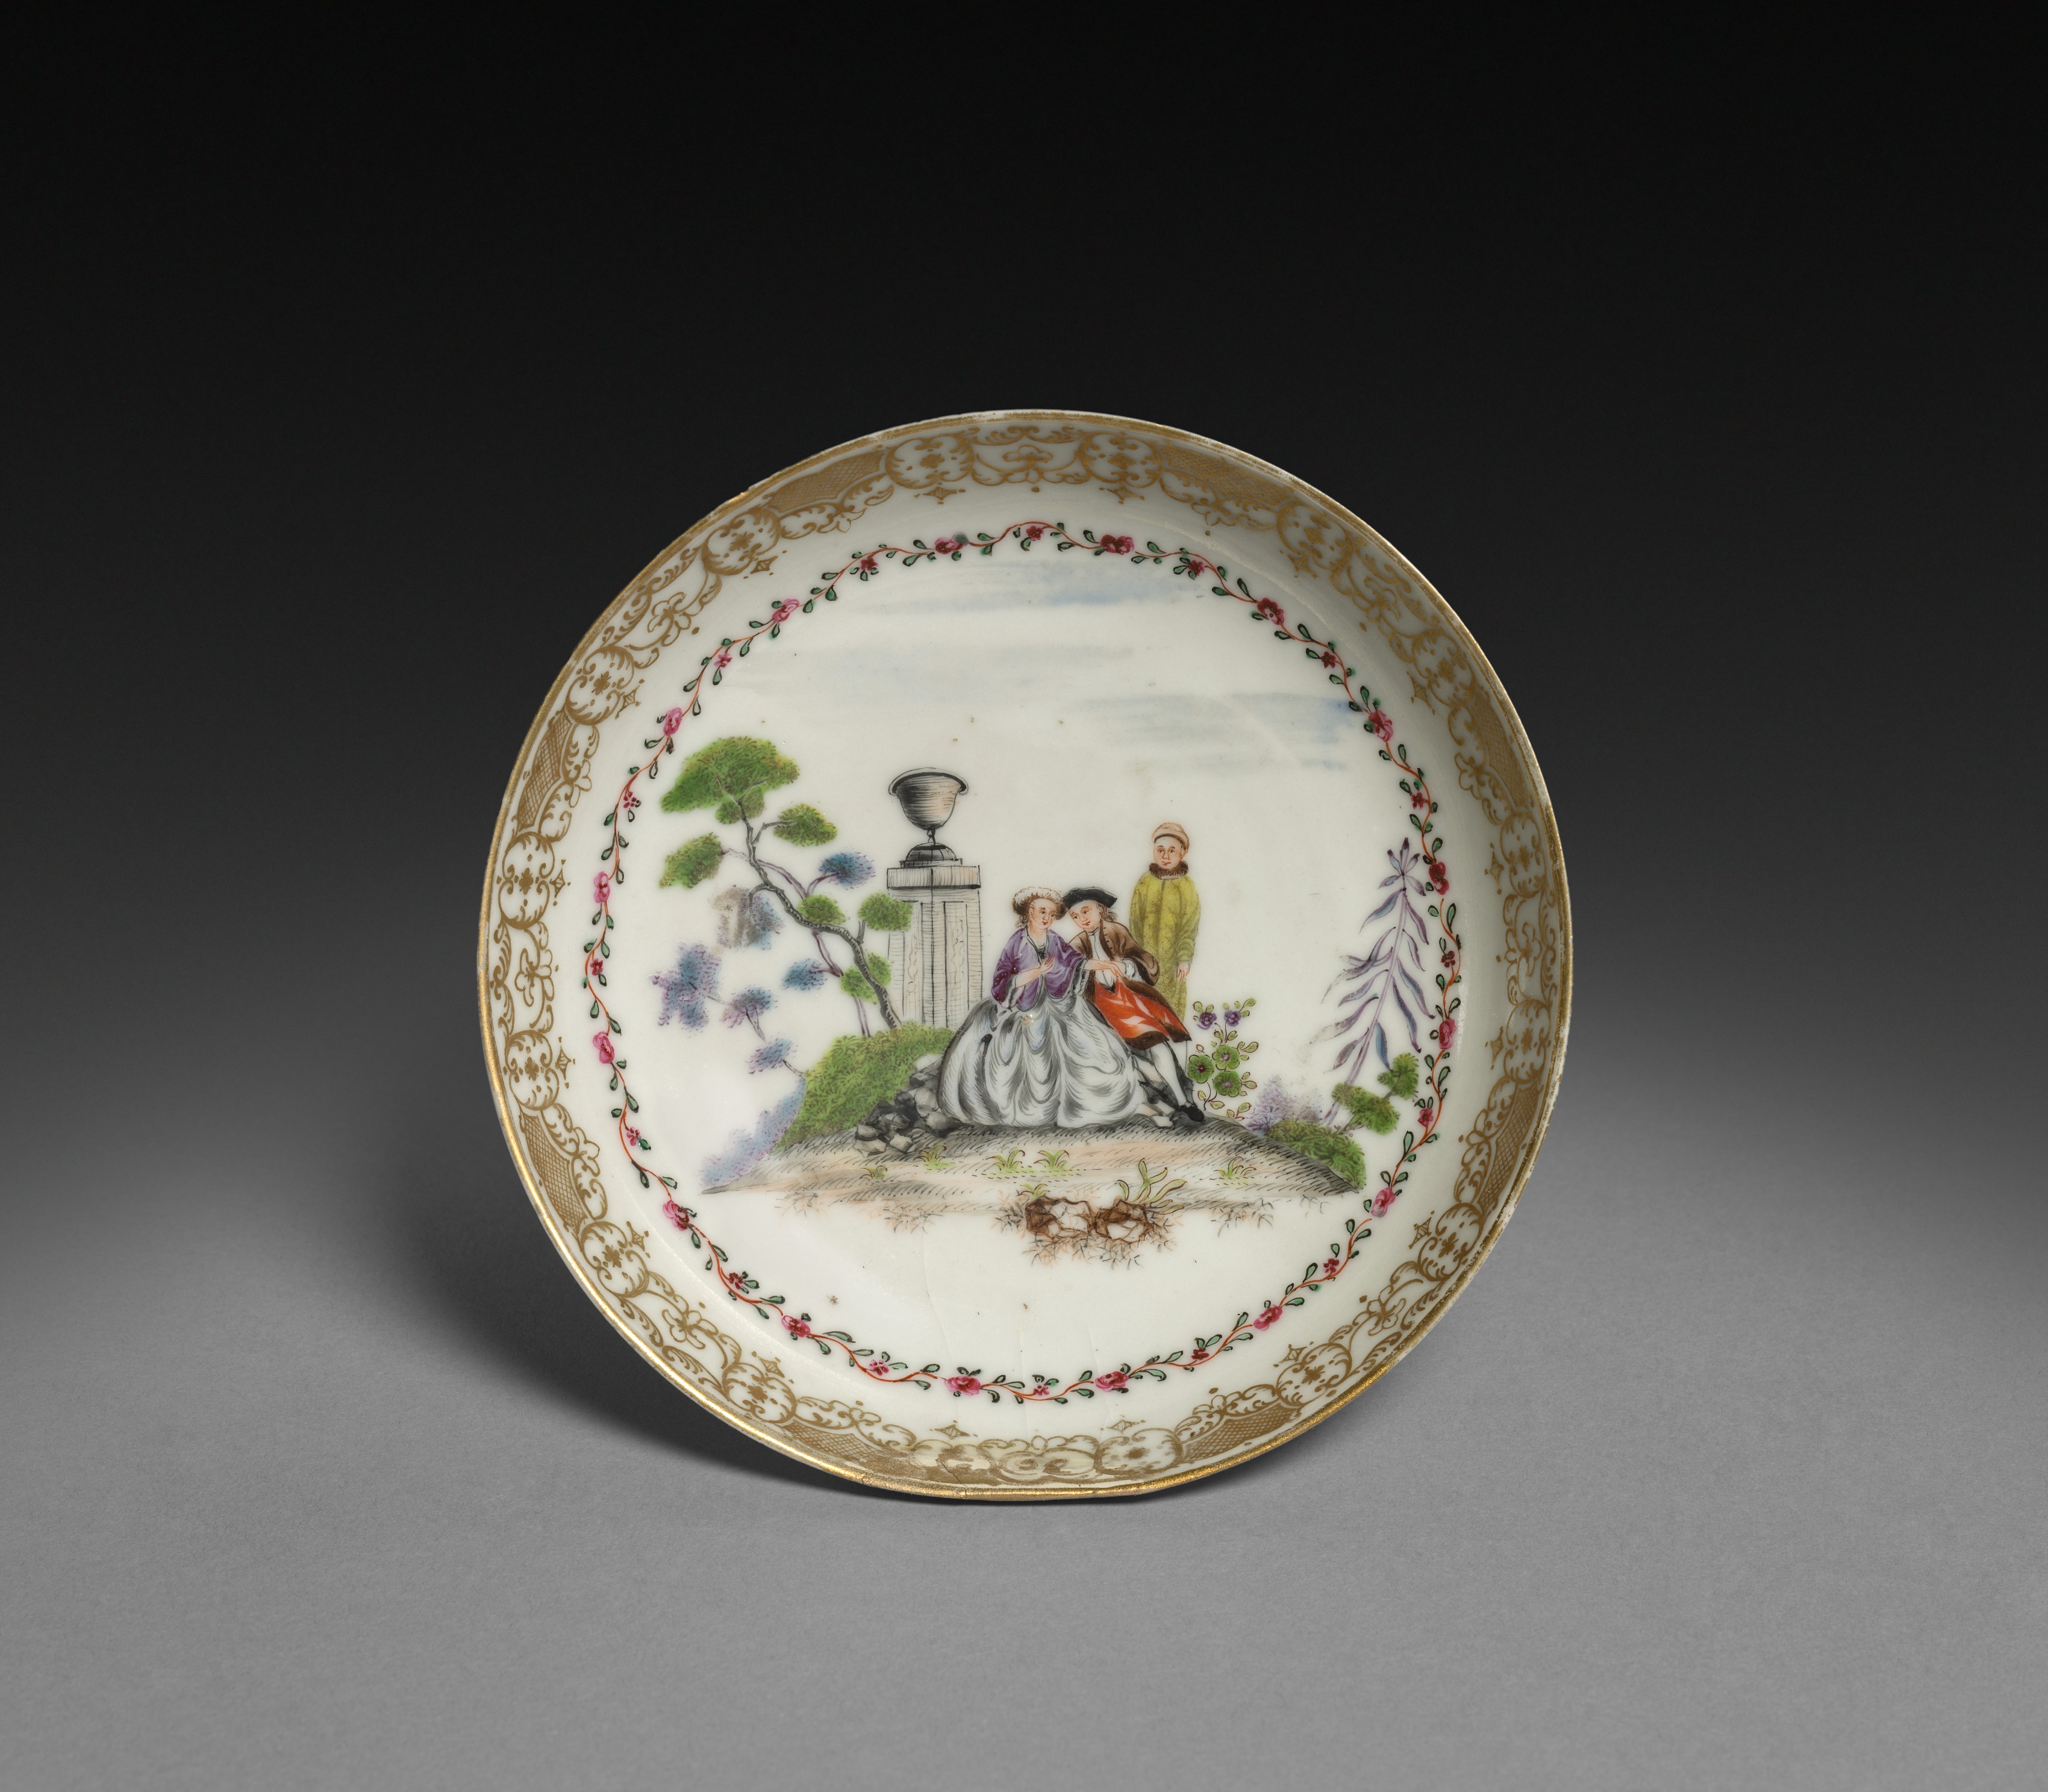 Saucer with Scene in style of Watteau